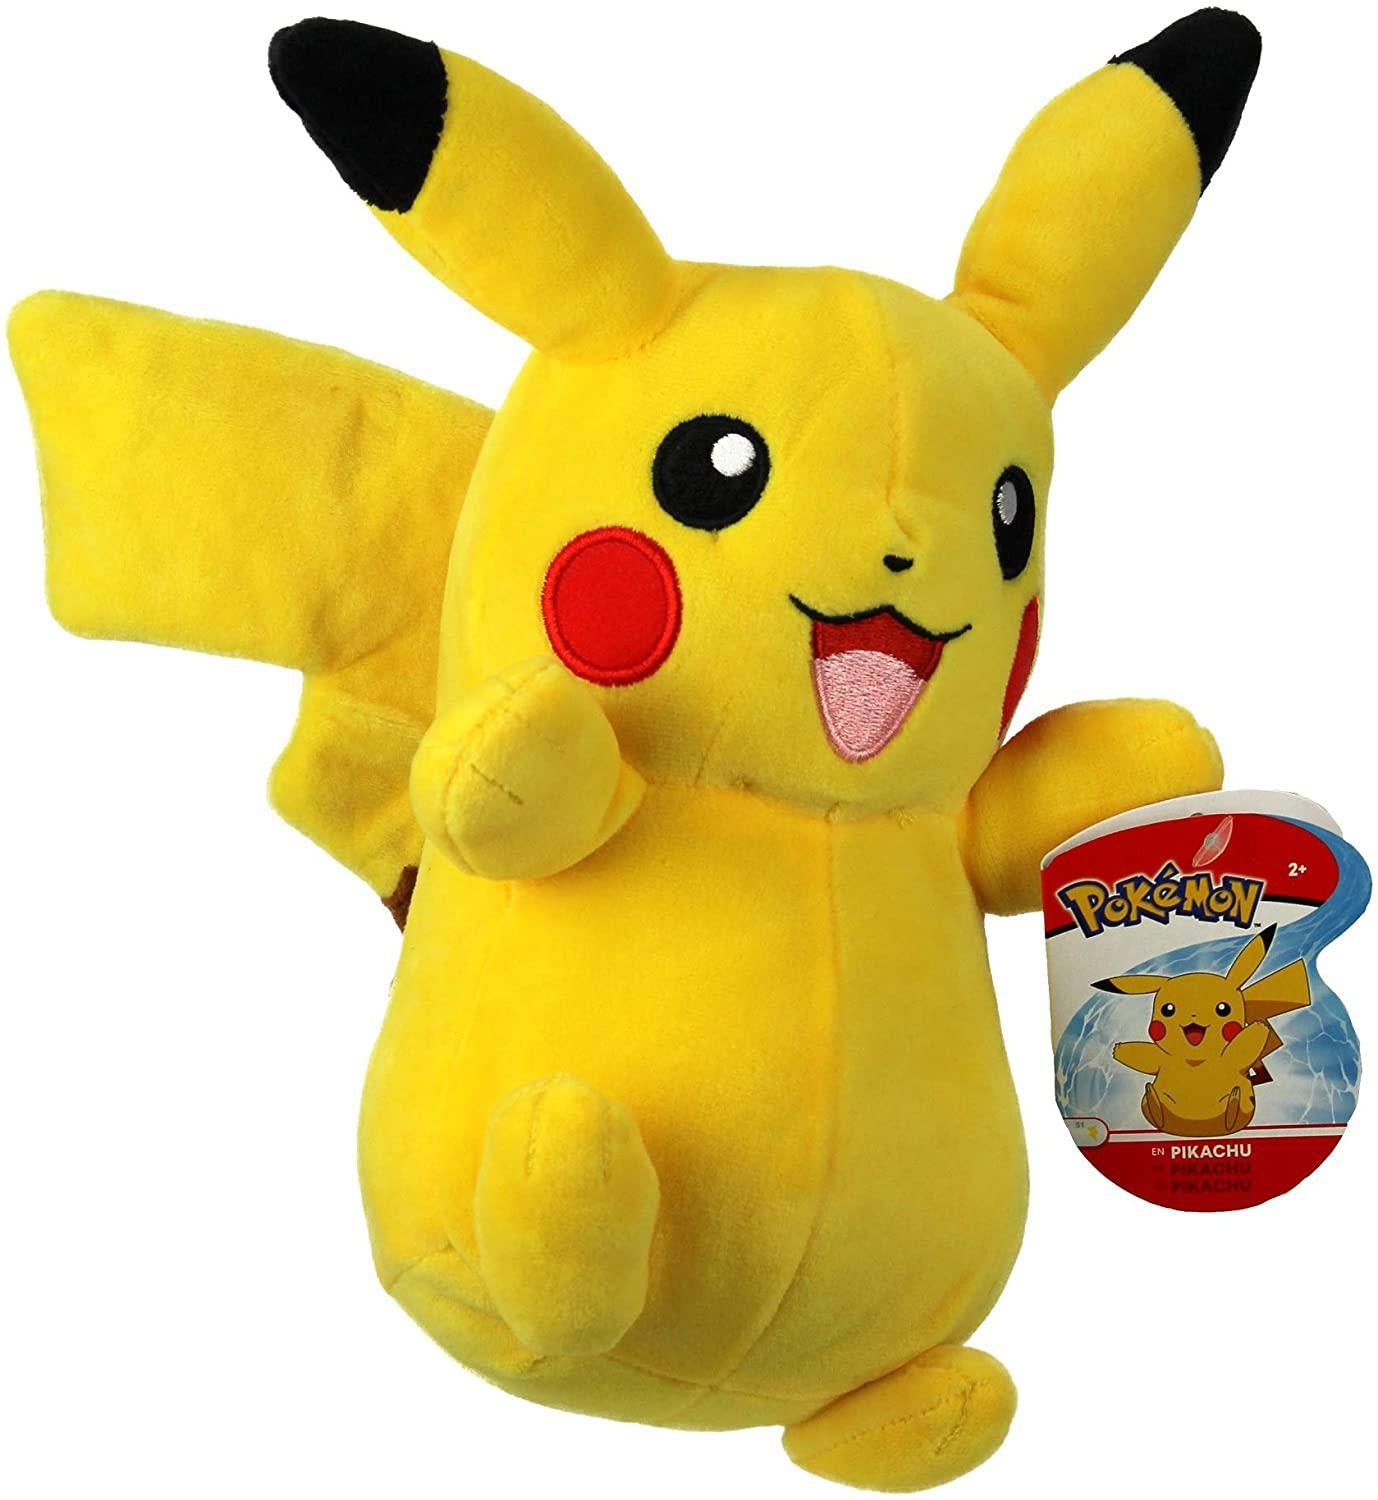 Pokemon Pikachu 8" Plush - Officially Licensed and Stuffed Animal Material